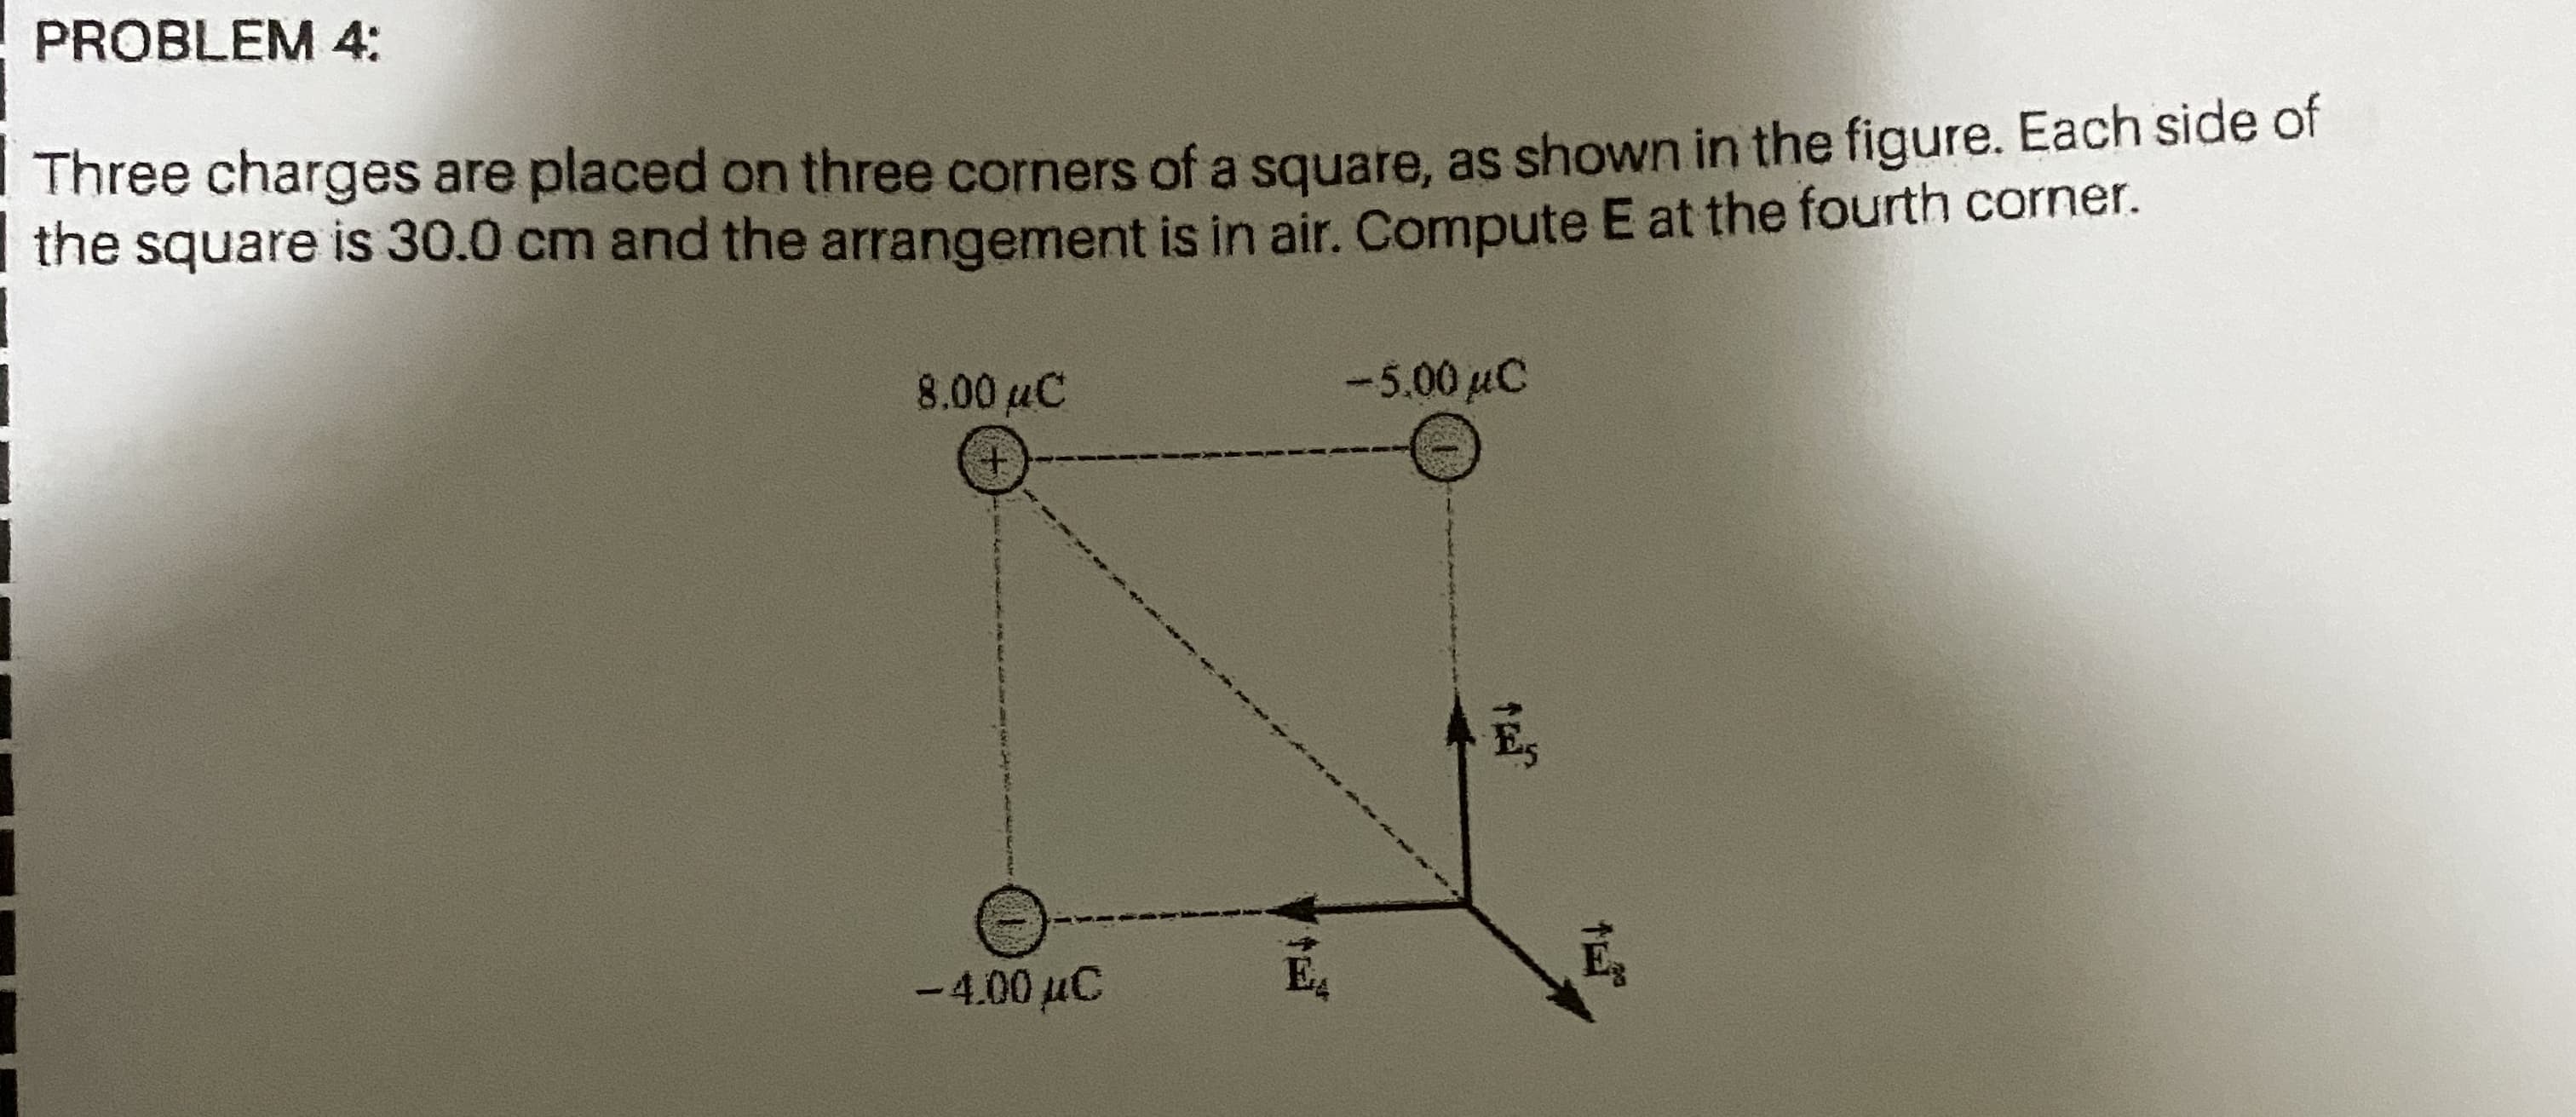 PROBLEM 4:
Three charges are placed on three corners of a square, as shown in the figure. Each side of
| the square is 30.0 cm and the arrangement is in air. Compute E at the fourth corner.
8.00 µC
-5.00 µC
-4.00 µC
